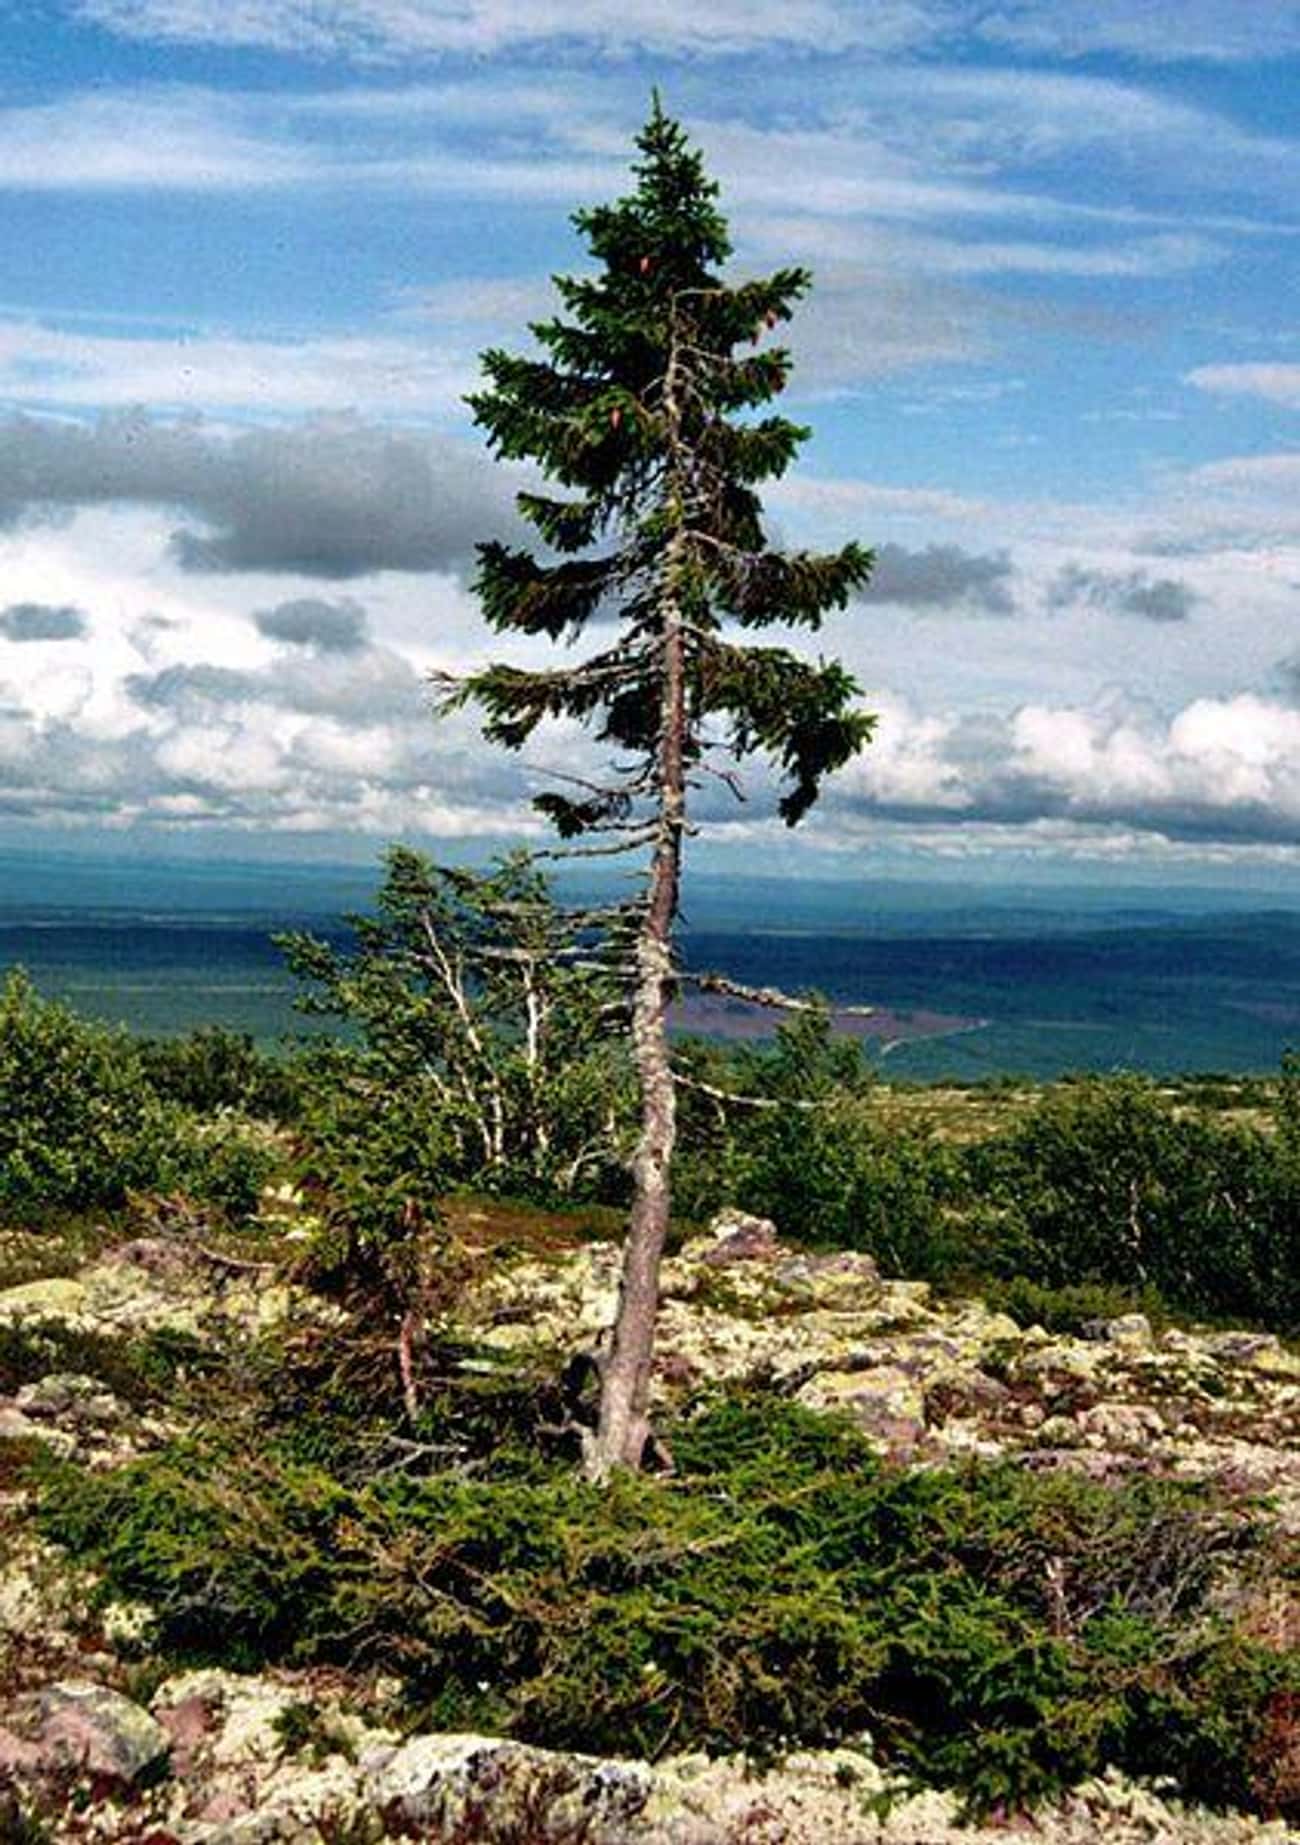 What's The Oldest Living Tree On Earth?